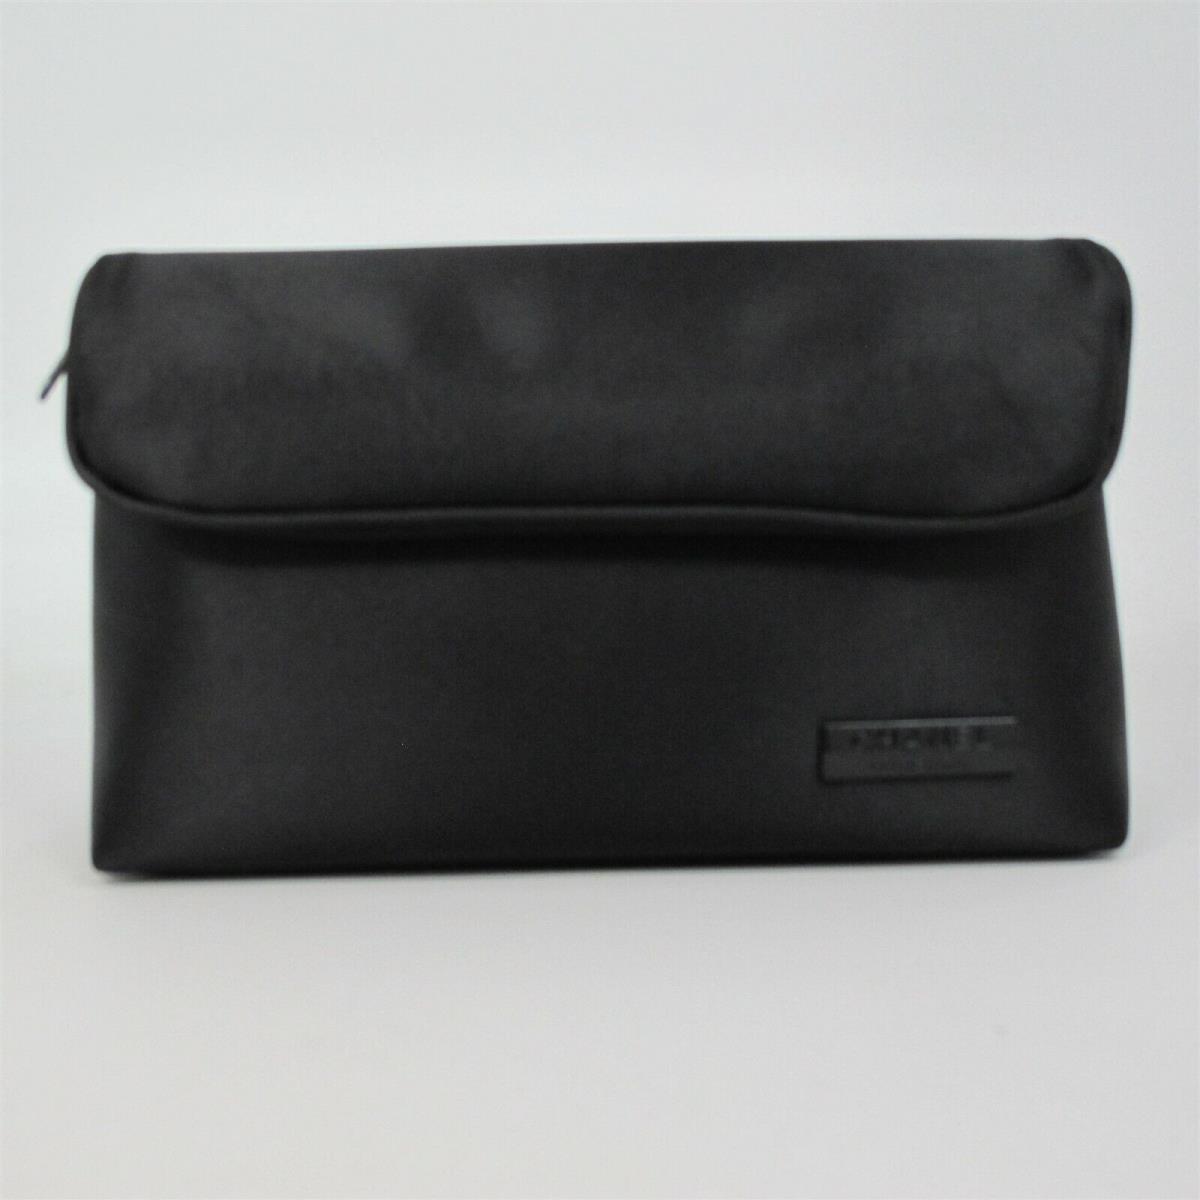 Chanel Parfums Black Satin Makeup Clutch Only See Notes